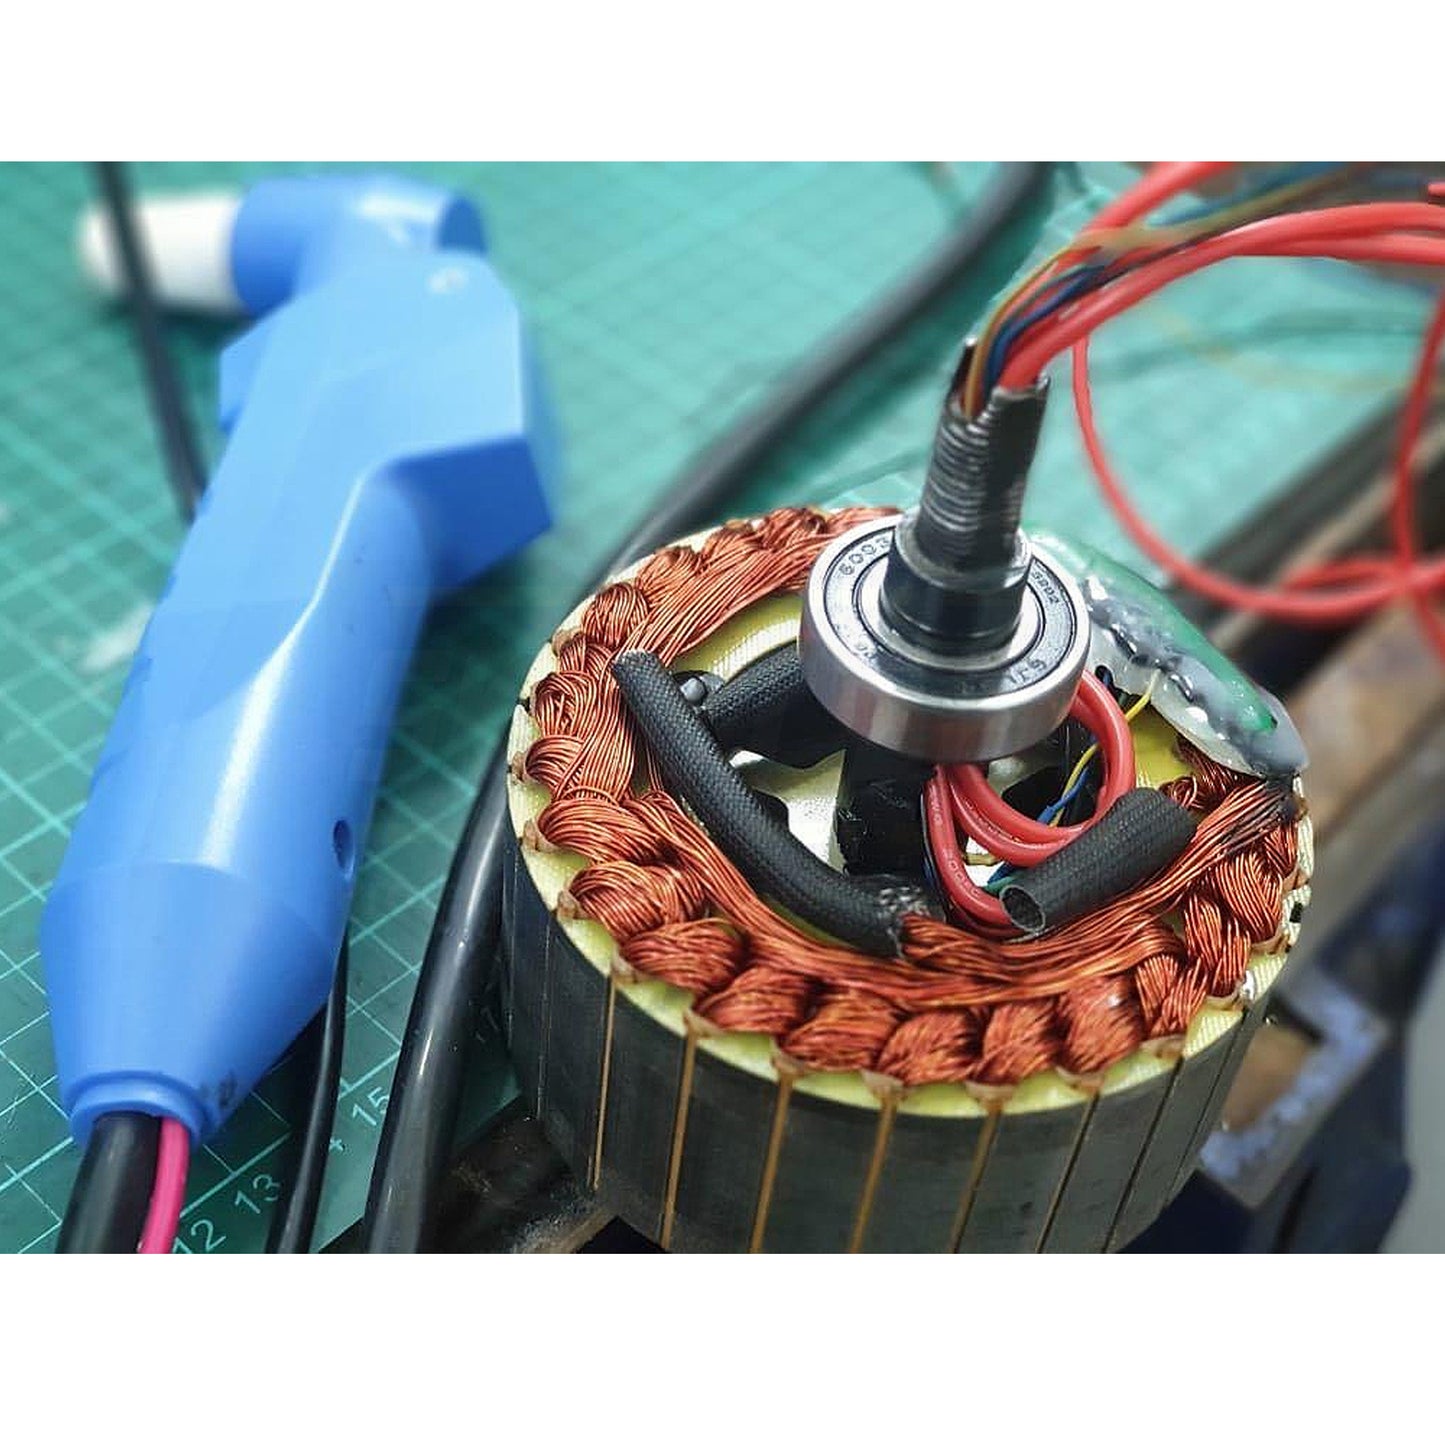 Motor Phase & Hall Sensors Wires Repairs/Replacements